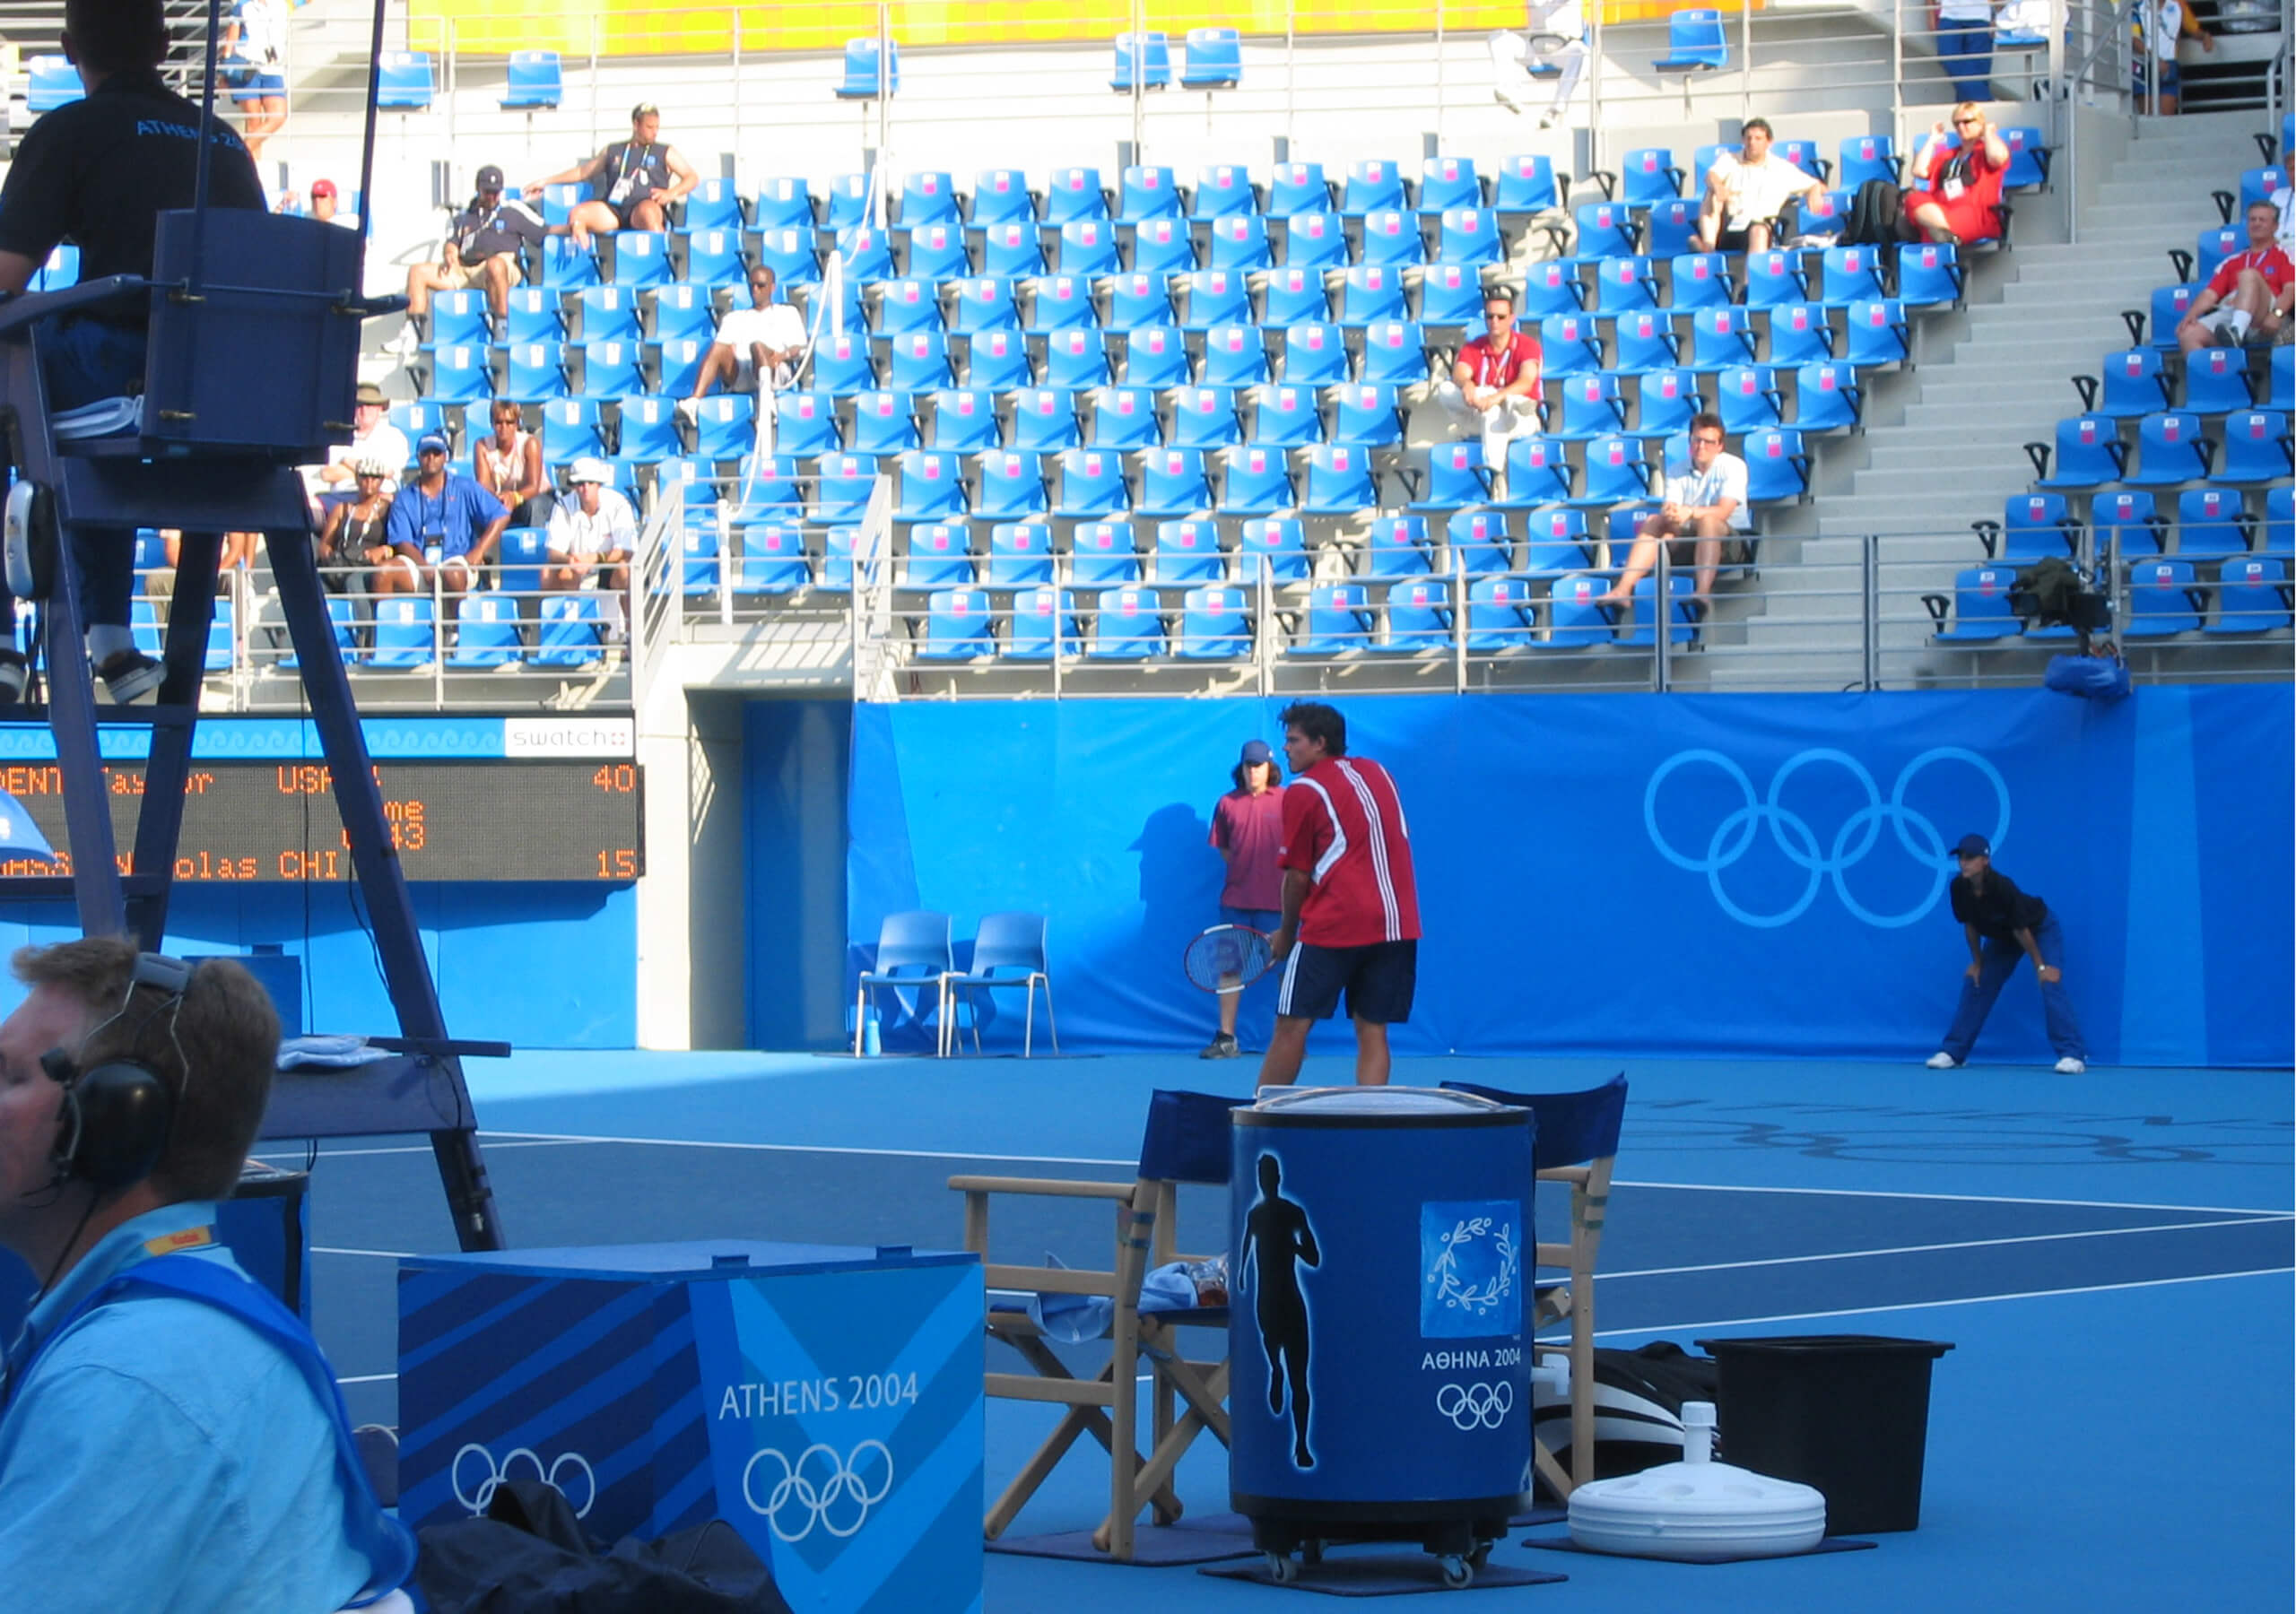 Athens Olympic Tennis Center image 8